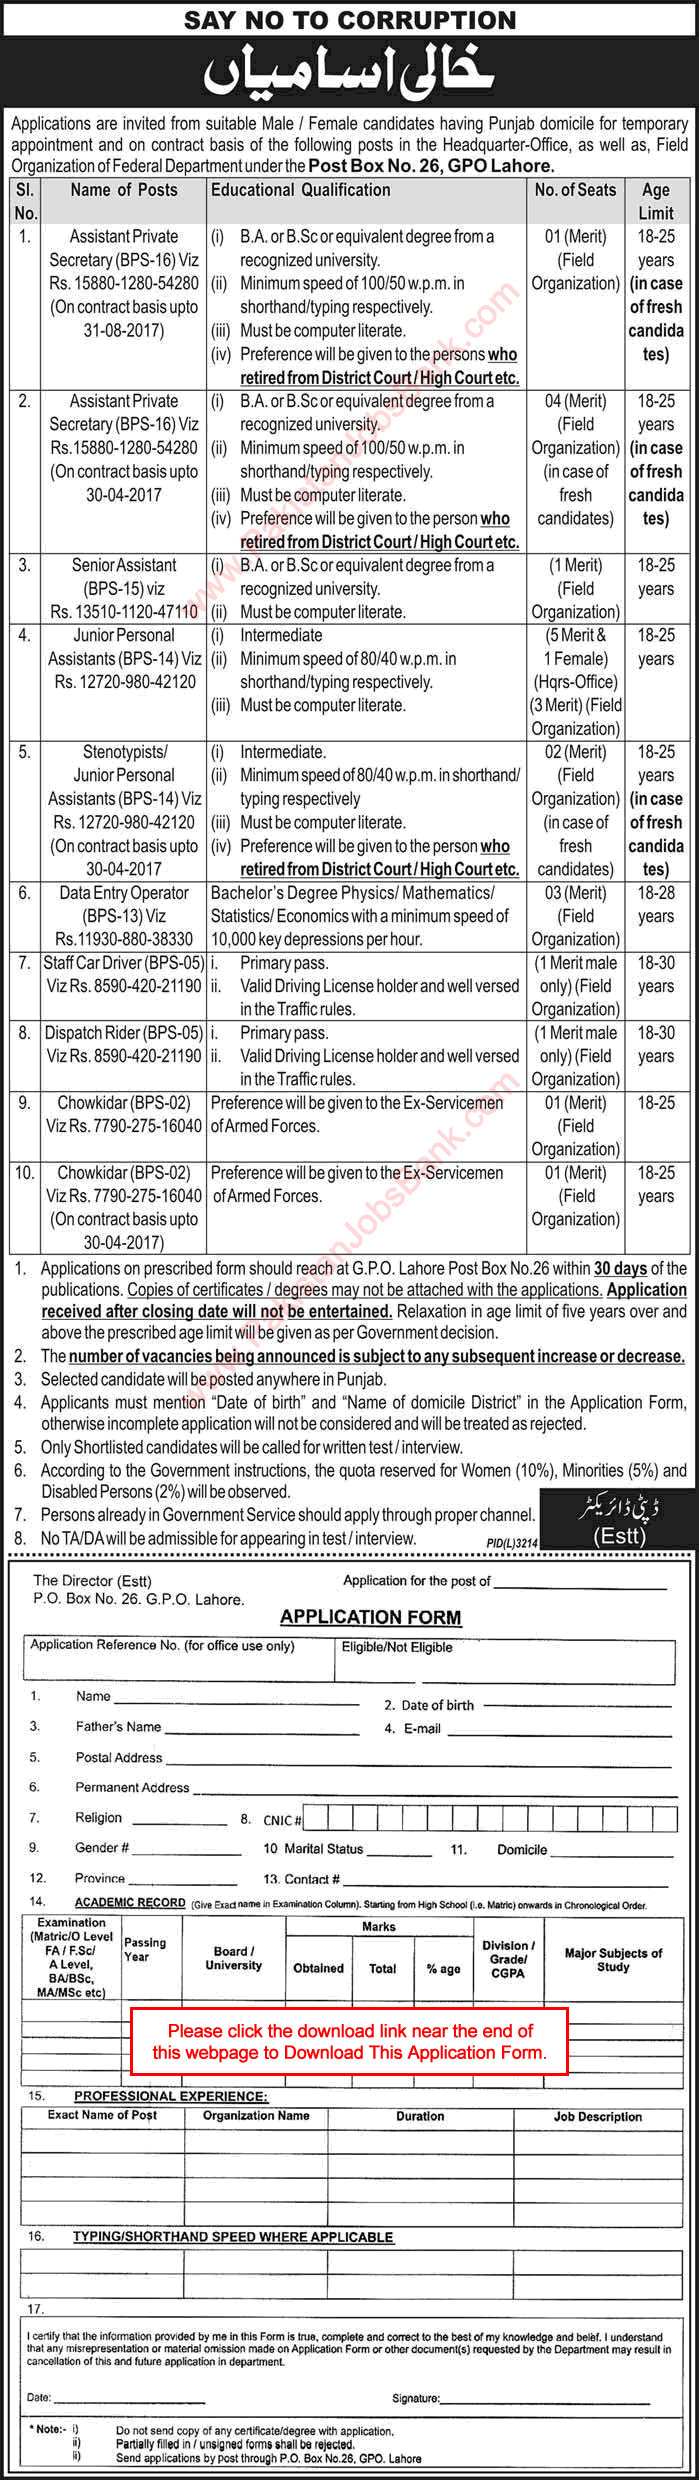 PO Box 26 GPO Lahore Jobs 2017 March Application Form Provincial Election Commission Punjab ECP Latest